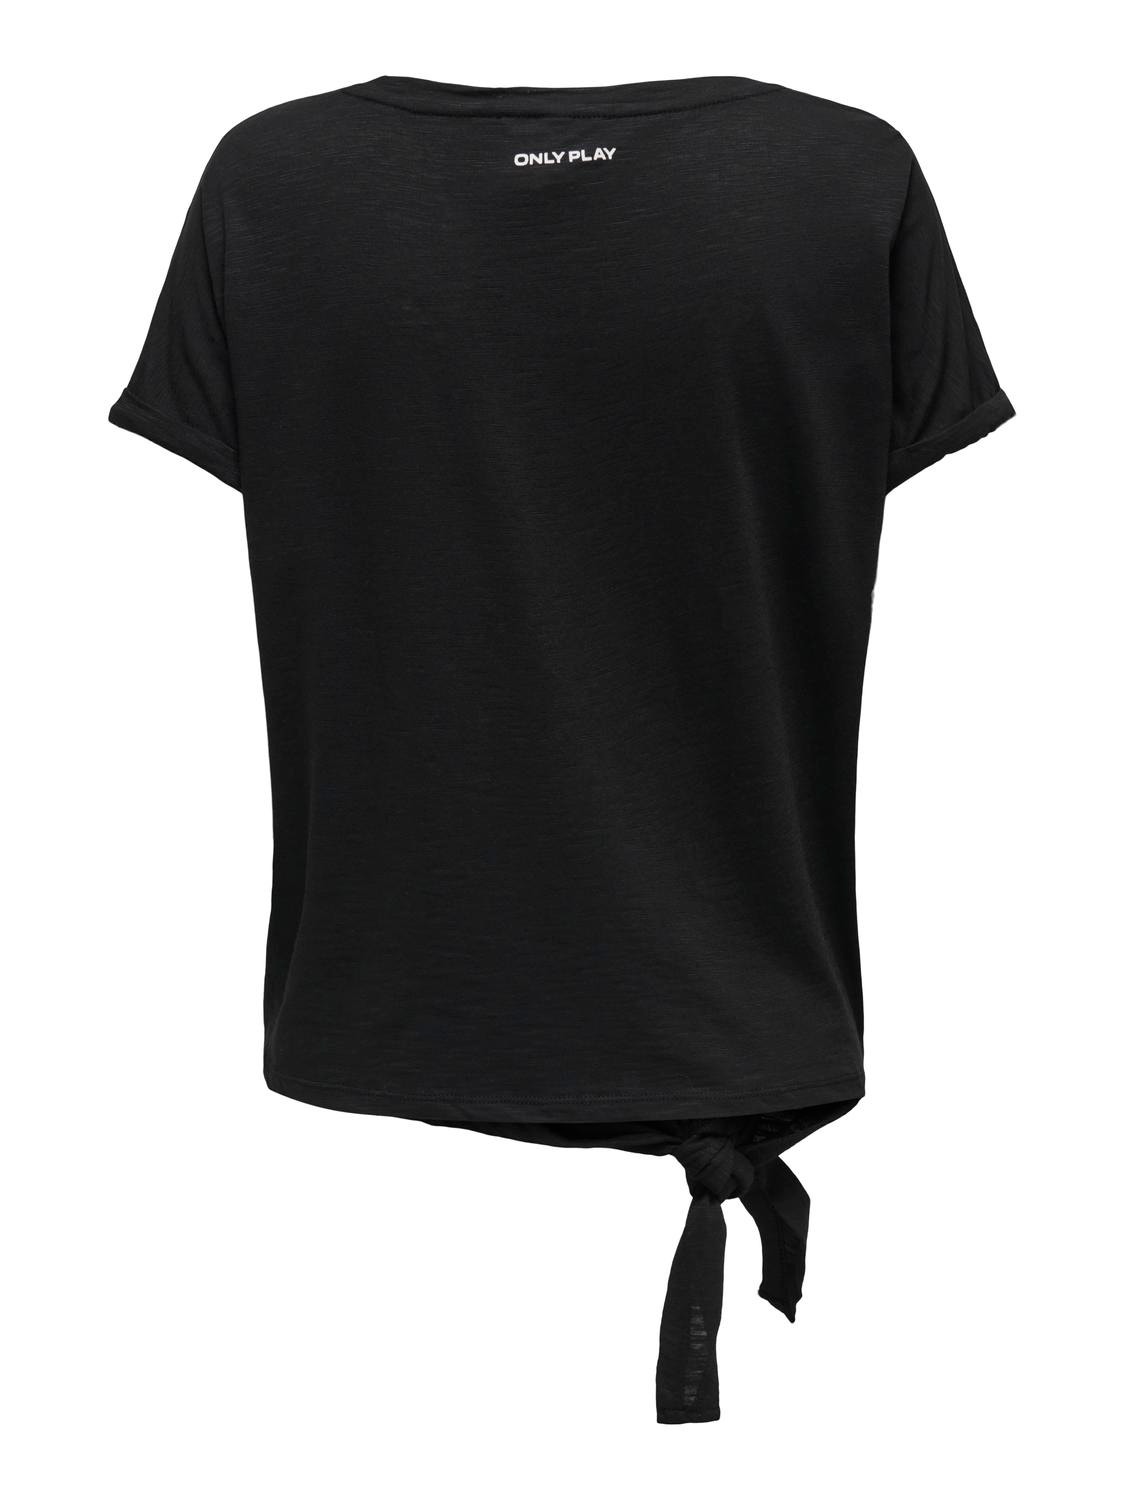 ONLY Loose Fit Round Neck T-Shirt -Black - 15302768